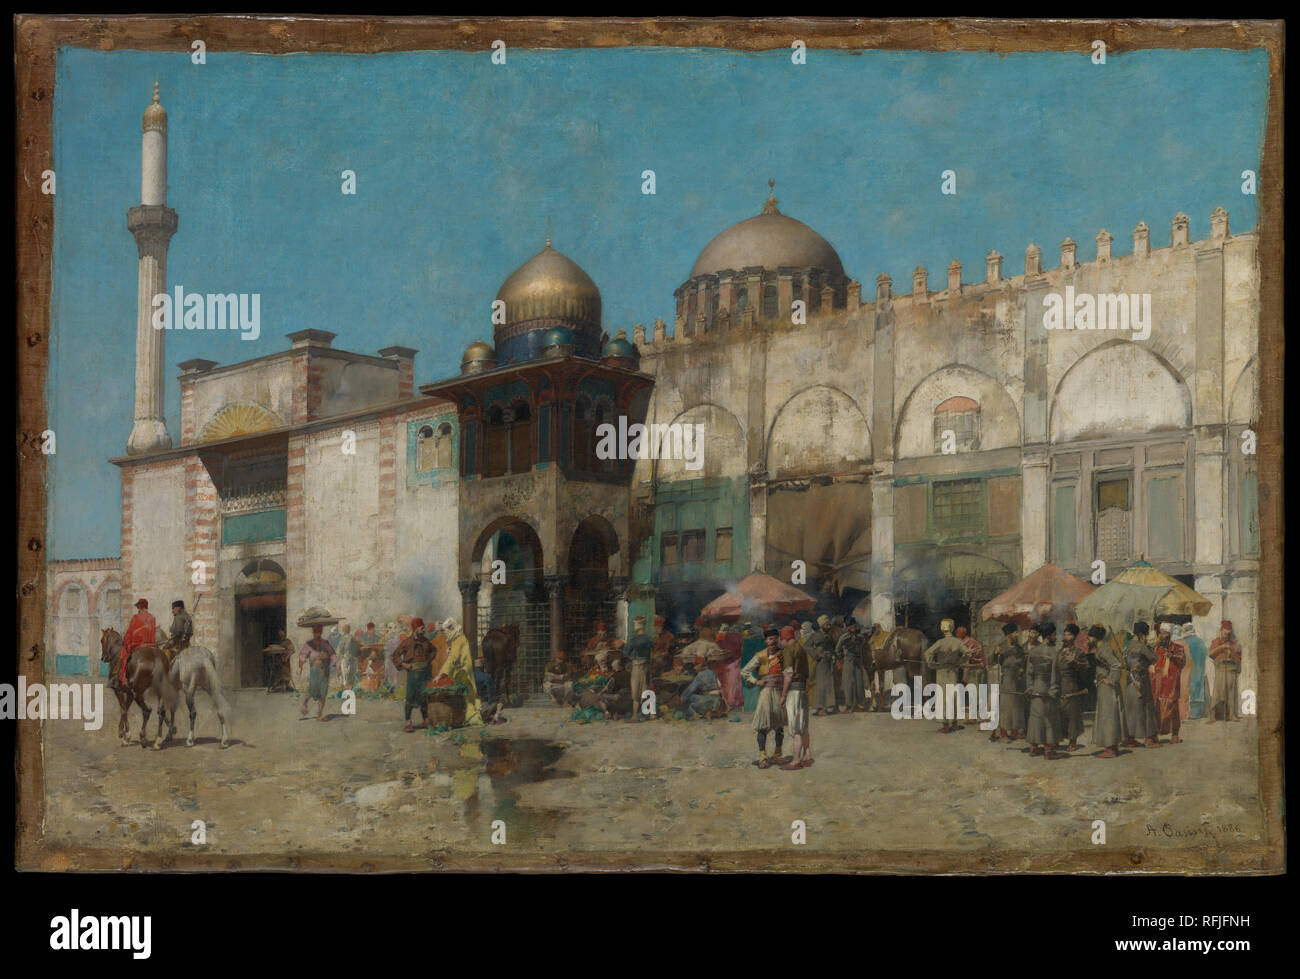 A Mosque. Artist: Alberto Pasini (Italian, Busseto 1826-1899 Cavoretto). Dimensions: 14 5/8 x 21 3/4 in. (37.1 x 55.2 cm). Date: 1886.  A mosque serves as the backdrop for this scene of village life, which features many figures outfitted in European-style military uniforms. Here, focusing on the lively mix of cultures, Pasini drew upon his extensive travels in the Middle East, which served as the source material for his paintings. His first opportunity to see this part of the world came in 1855, when he replaced his friend Théodore Chassériau as the official artist on a diplomatic mission to P Stock Photo